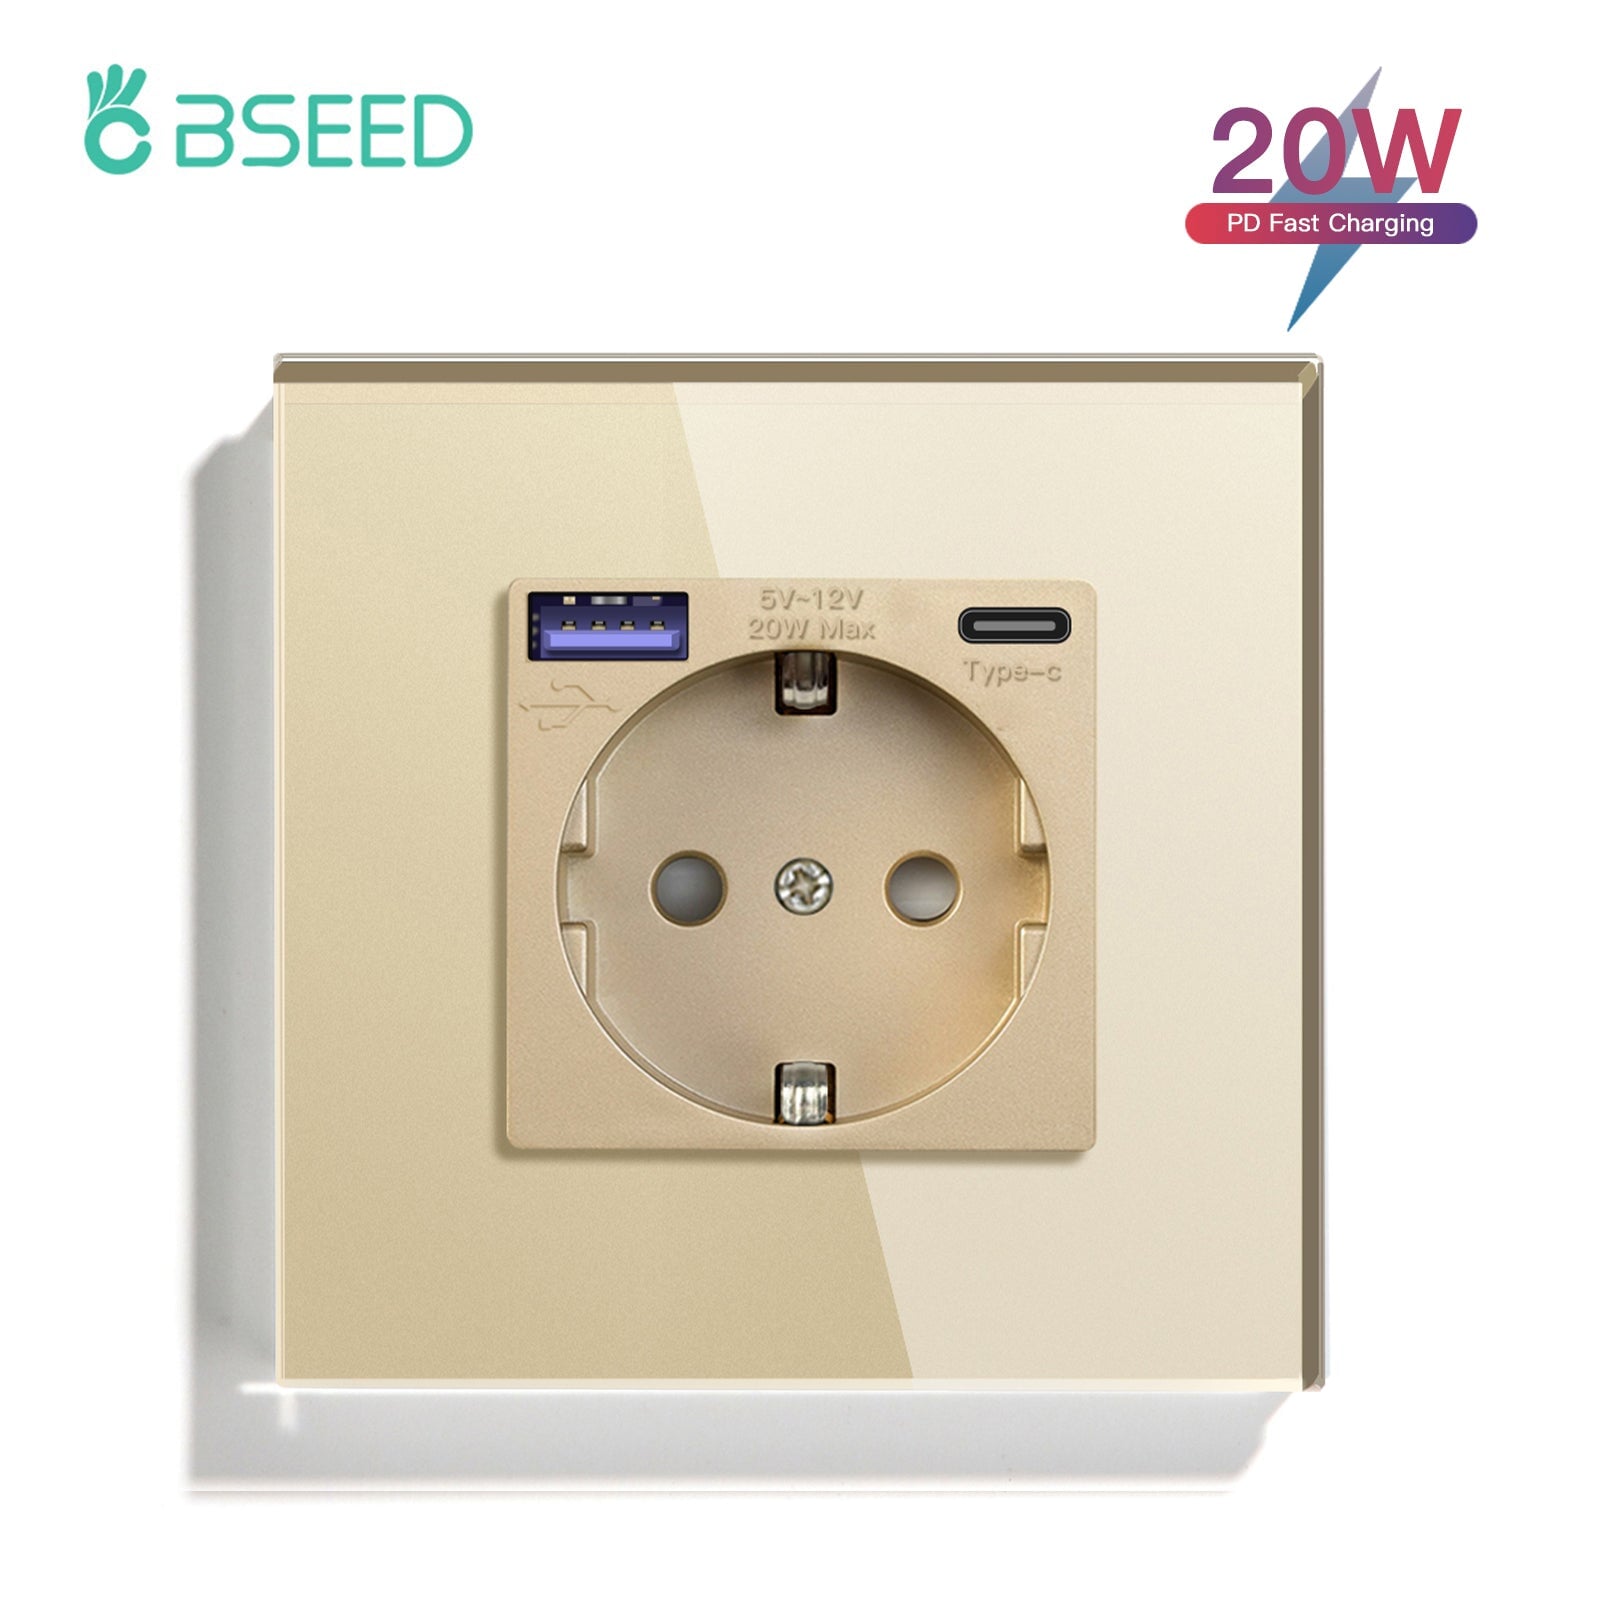 BSEED EU sockets with 20W PD Fast Charge Type-C Interface Outlet Wall Socket Power Outlets & Sockets Bseedswitch Golden Signle 